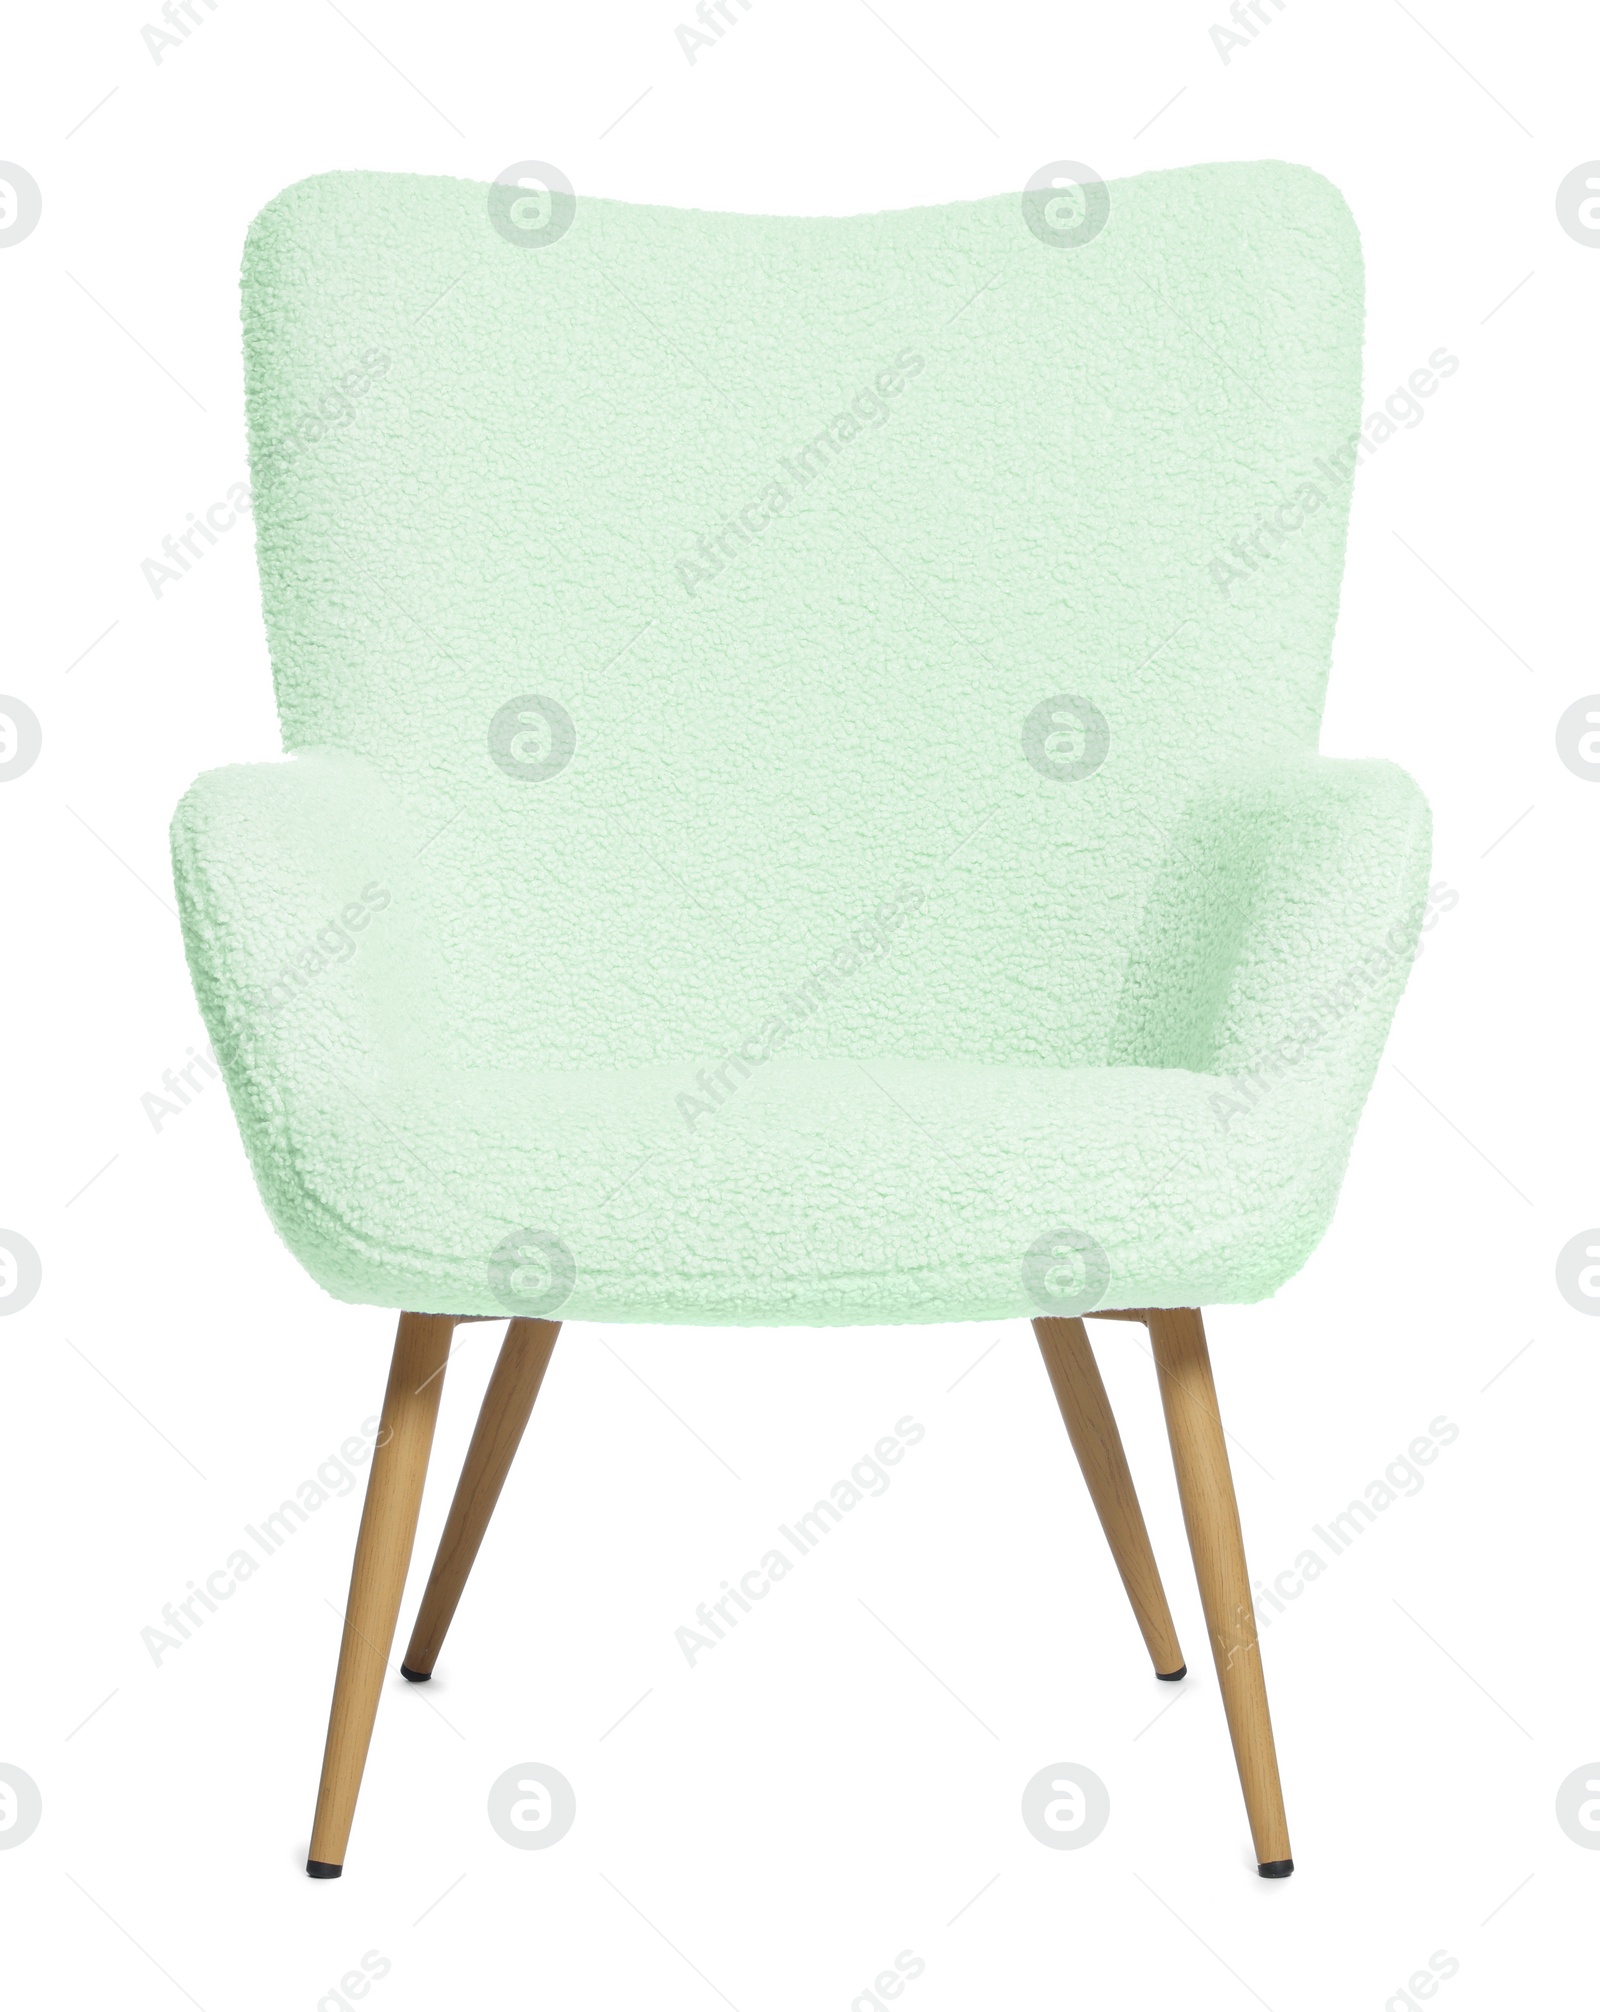 Image of One comfortable light green armchair isolated on white